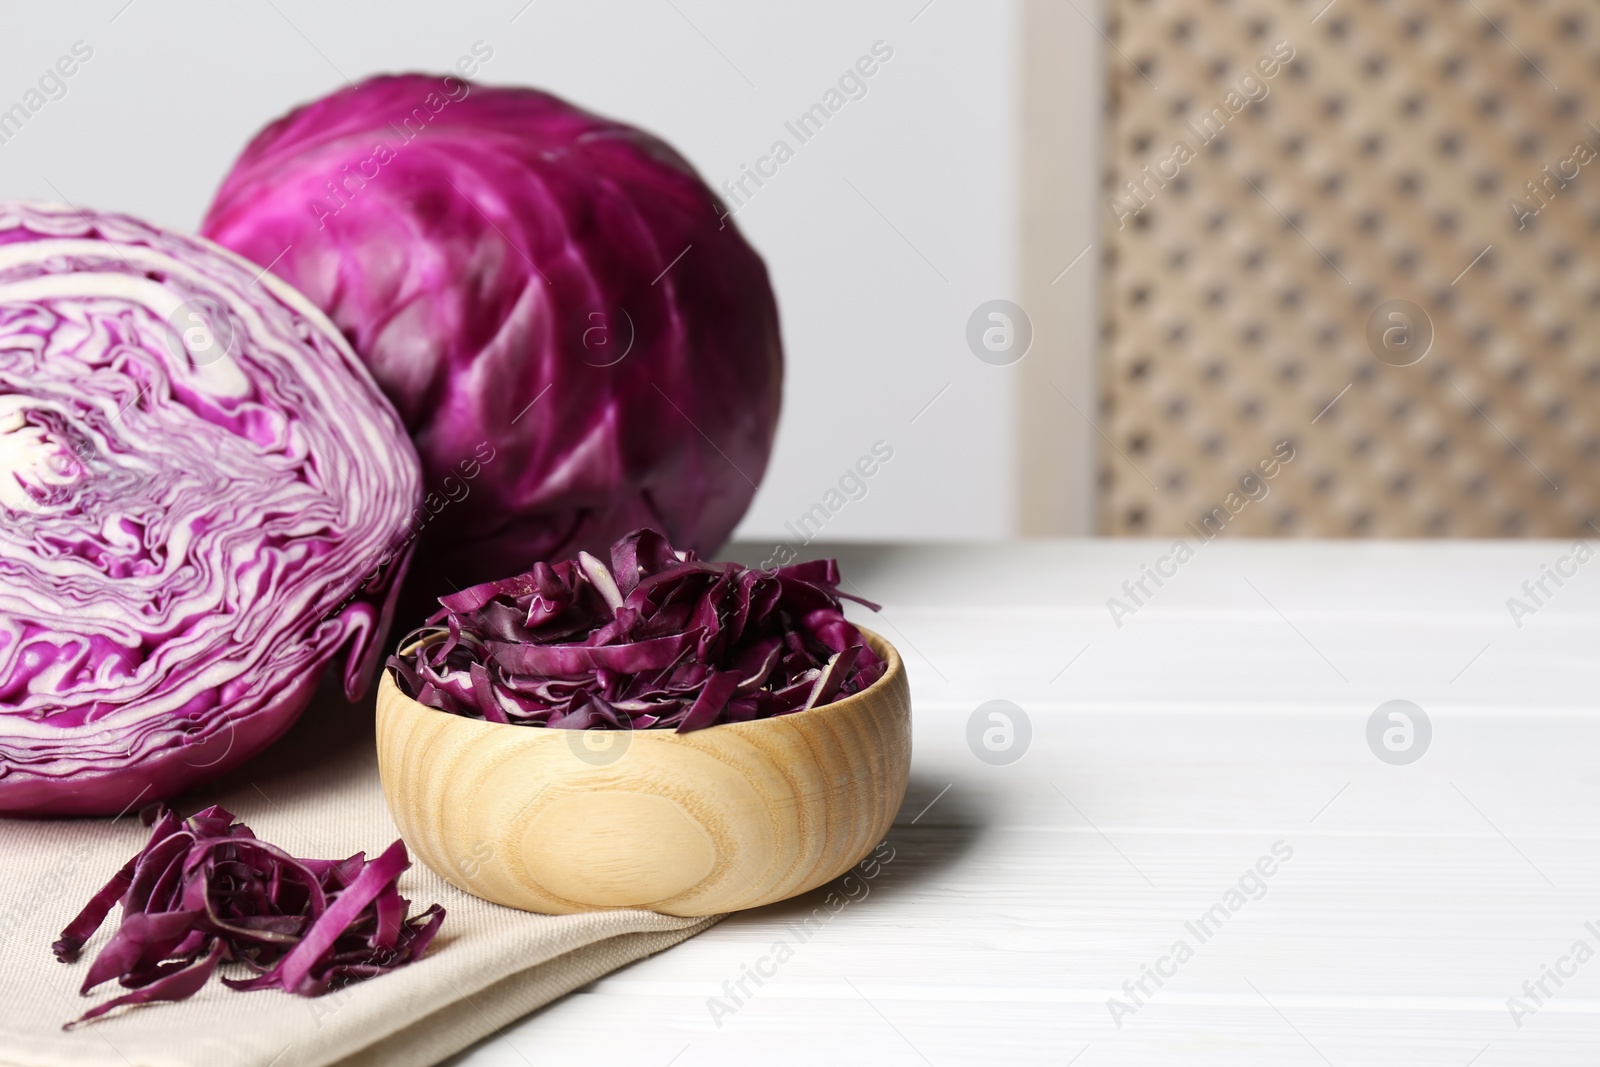 Photo of Whole and cut ripe red cabbages on white wooden table indoors. Space for text